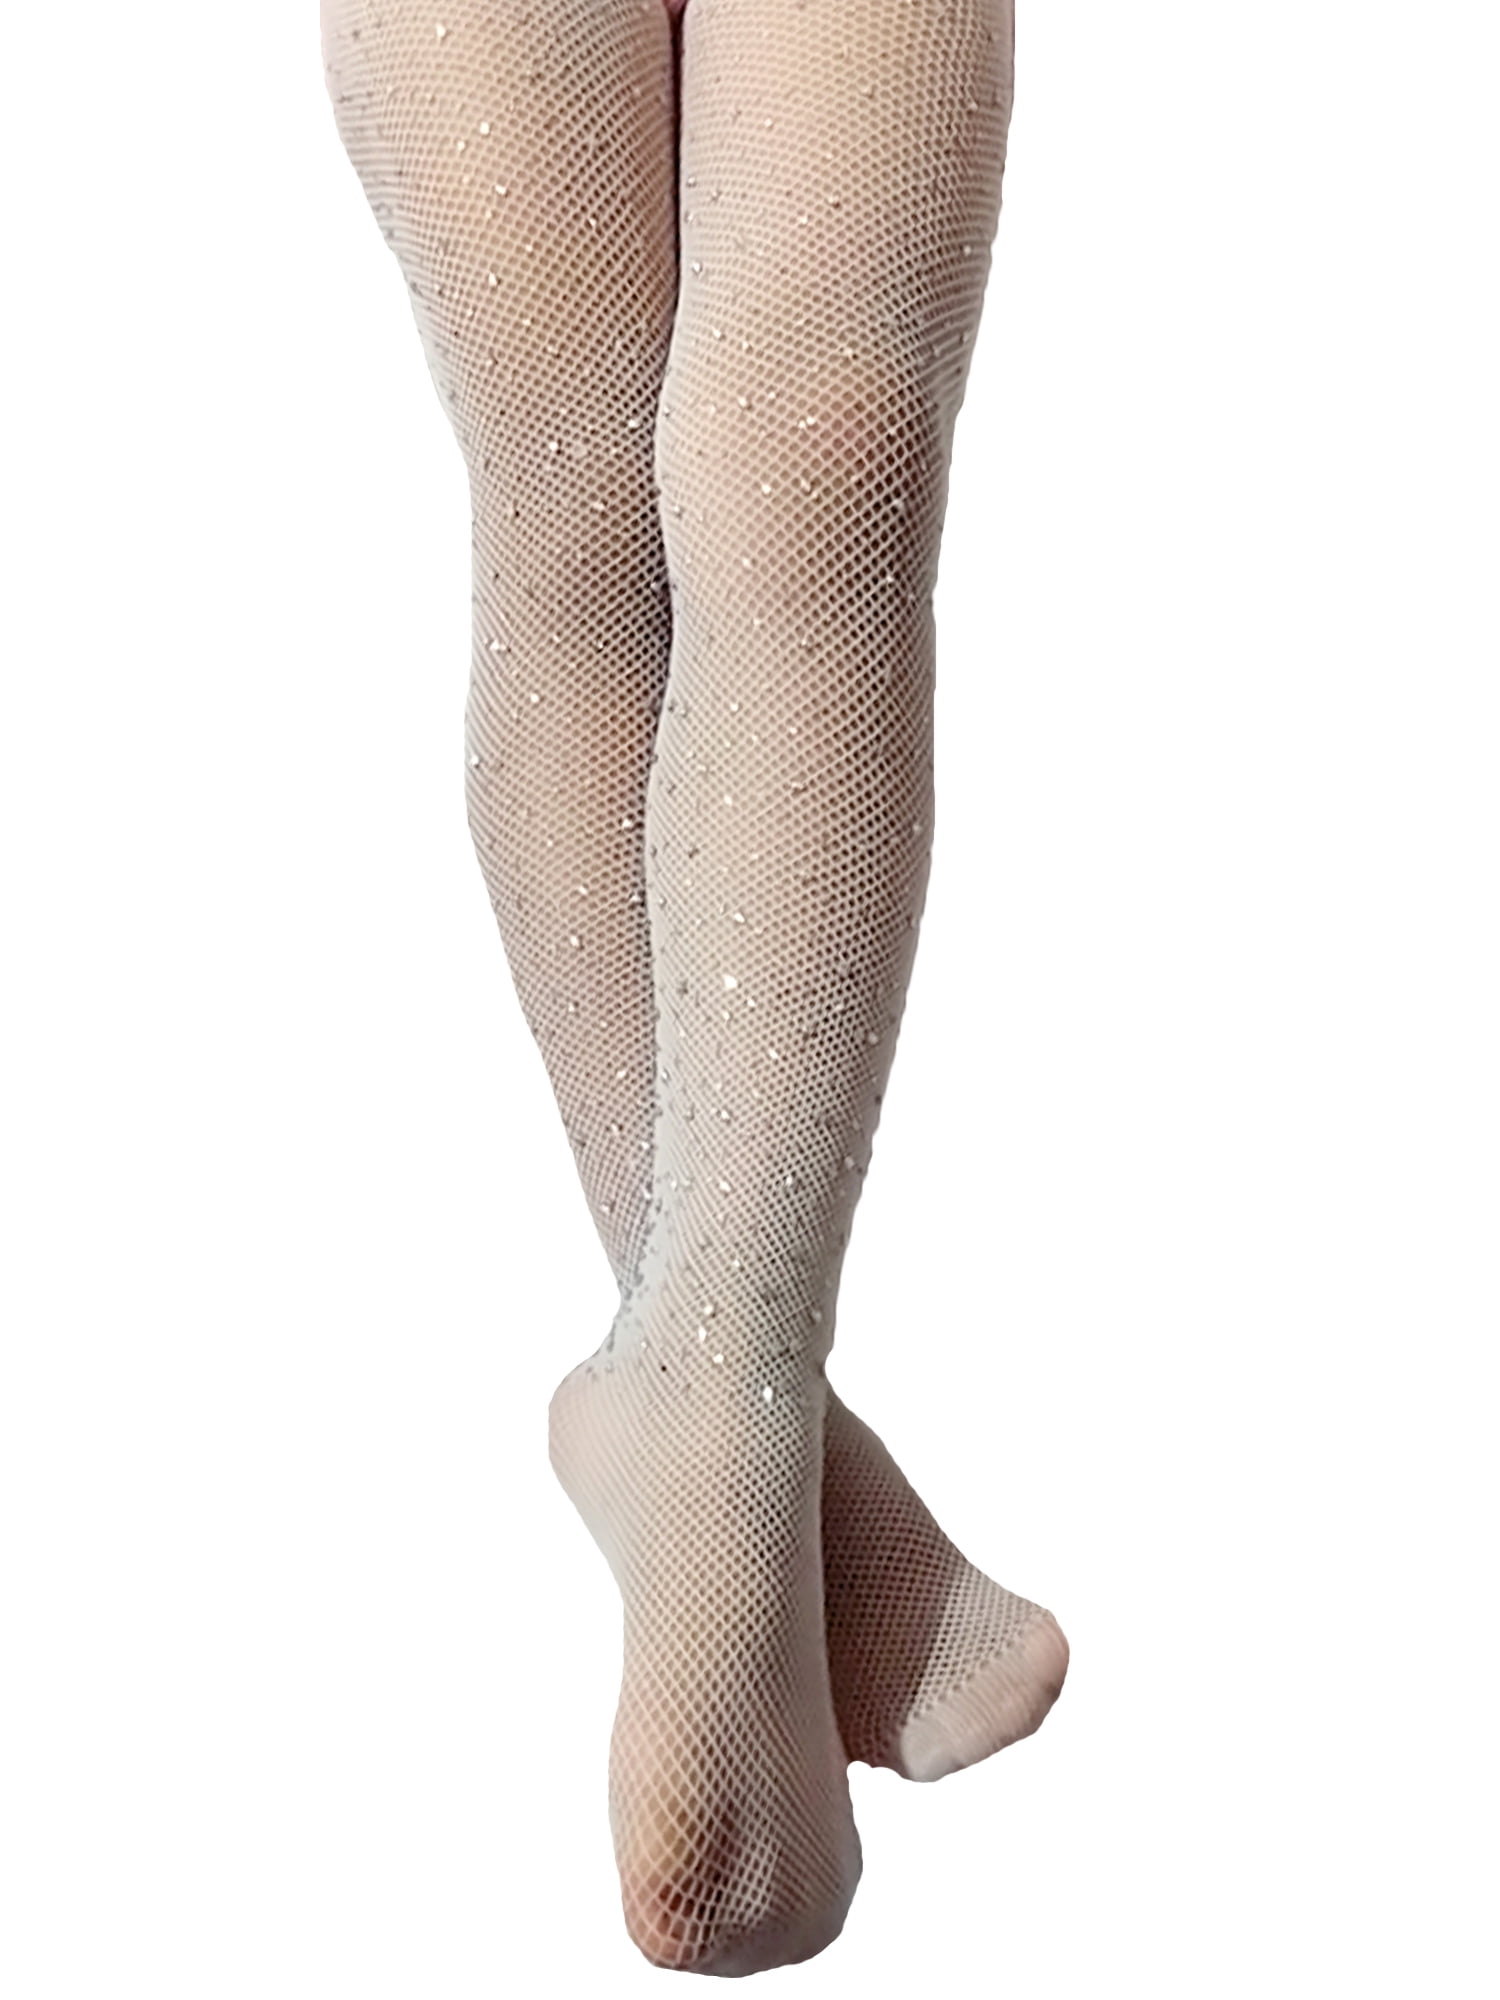 Liangchengmei Girls Tights Children's Fishnet Tight Black Sparkle Rhinestone  Hollow Out Pantyhose 